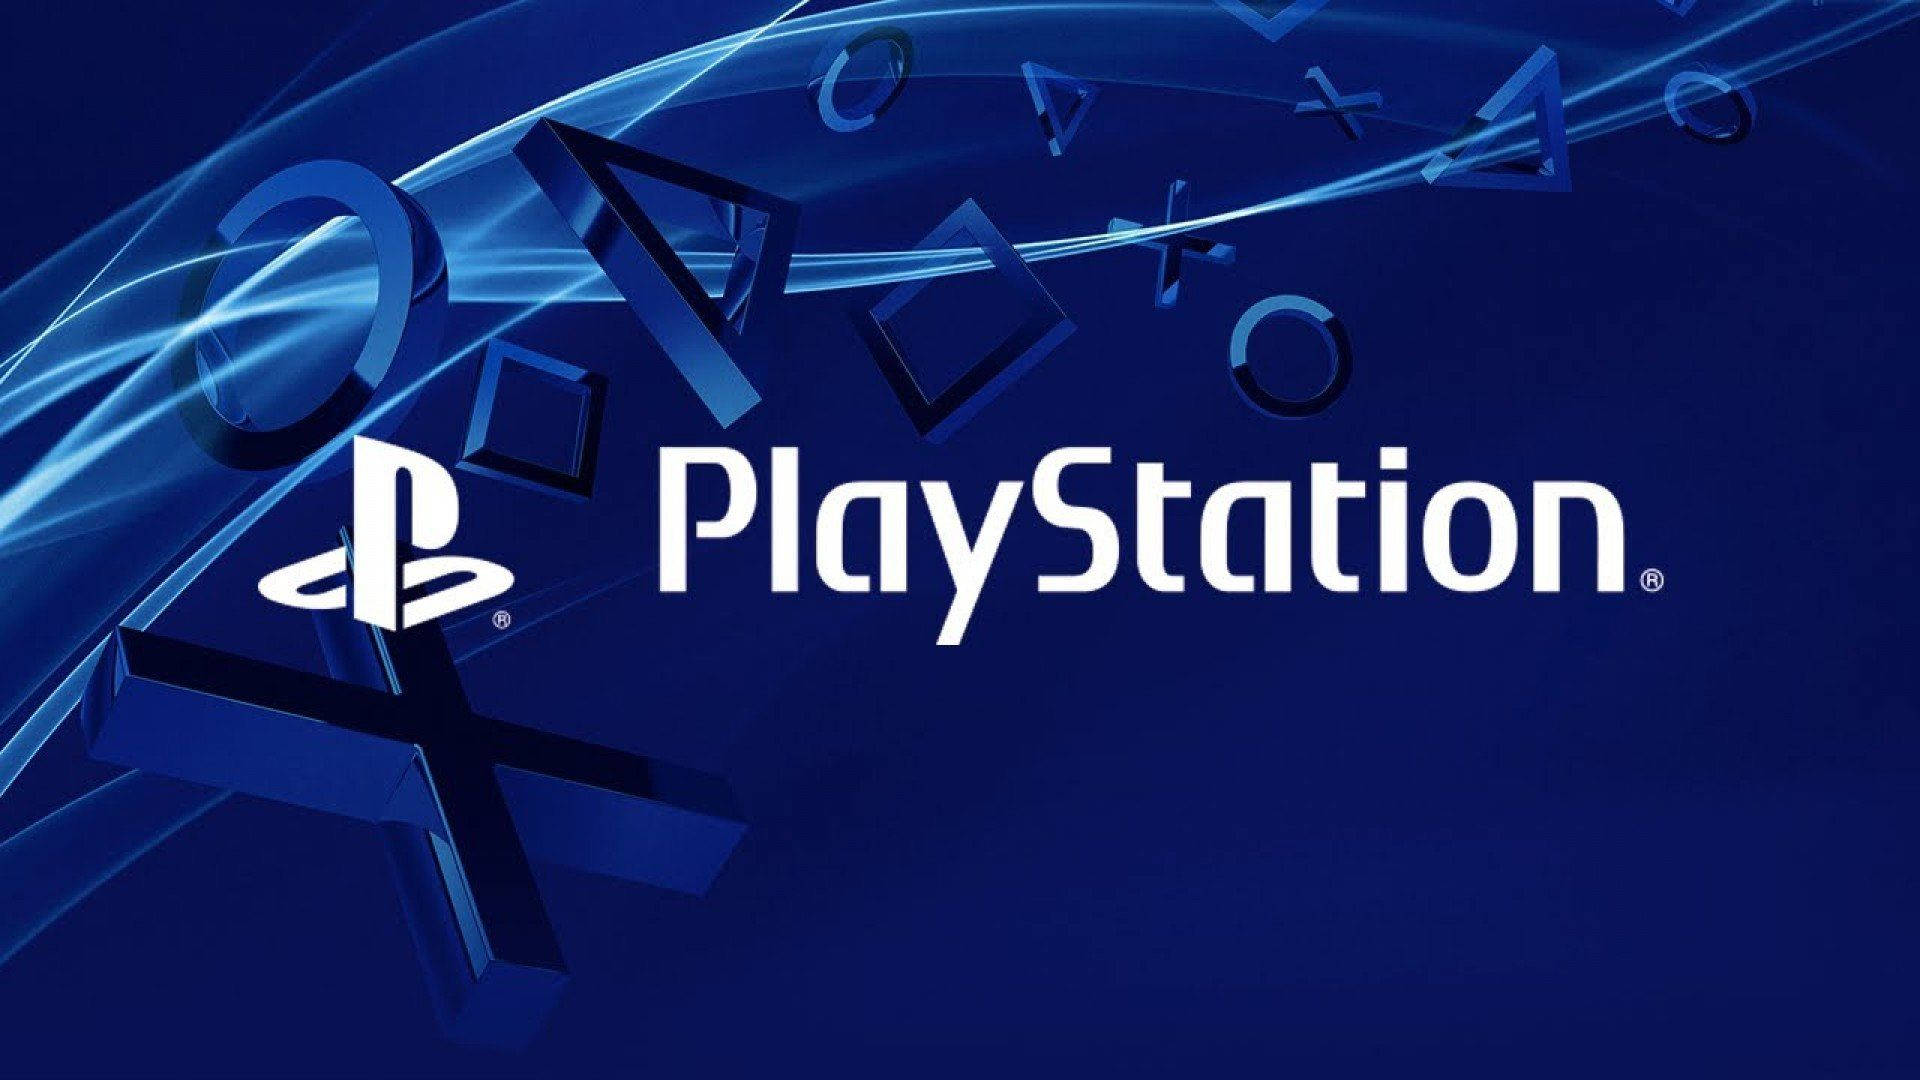 Playstation Wallpapers  Top 35 Best Playstation Wallpapers Download